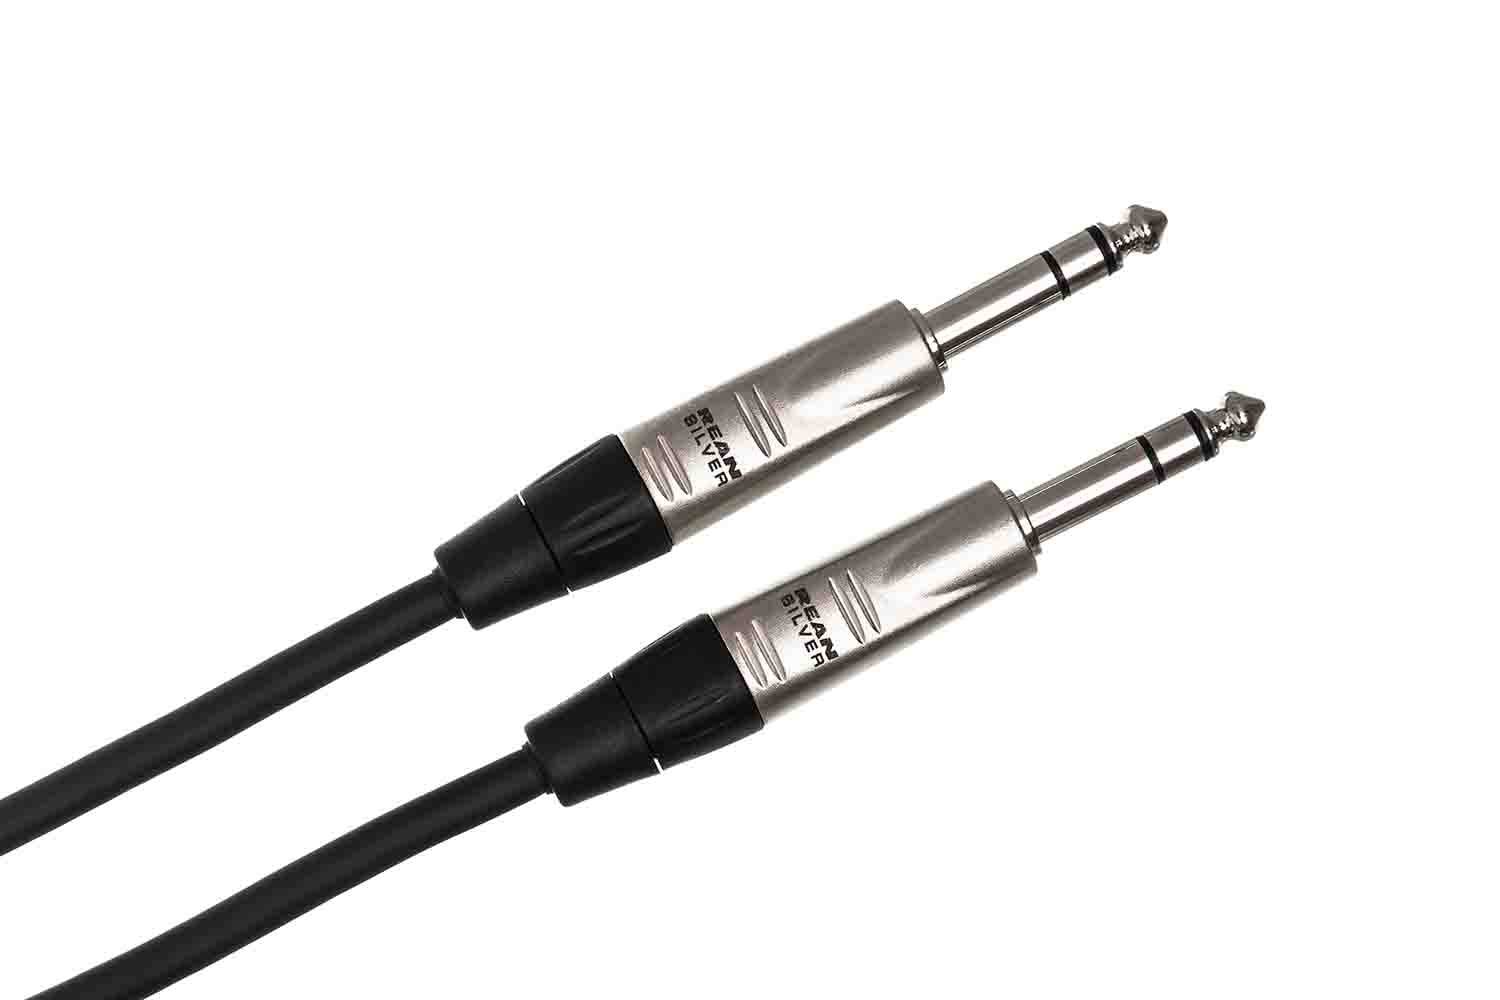 Hosa HSS-003 Pro Balanced Interconnect Cable, REAN 1/4 in TRS to Same - 3 Feet - Hollywood DJ